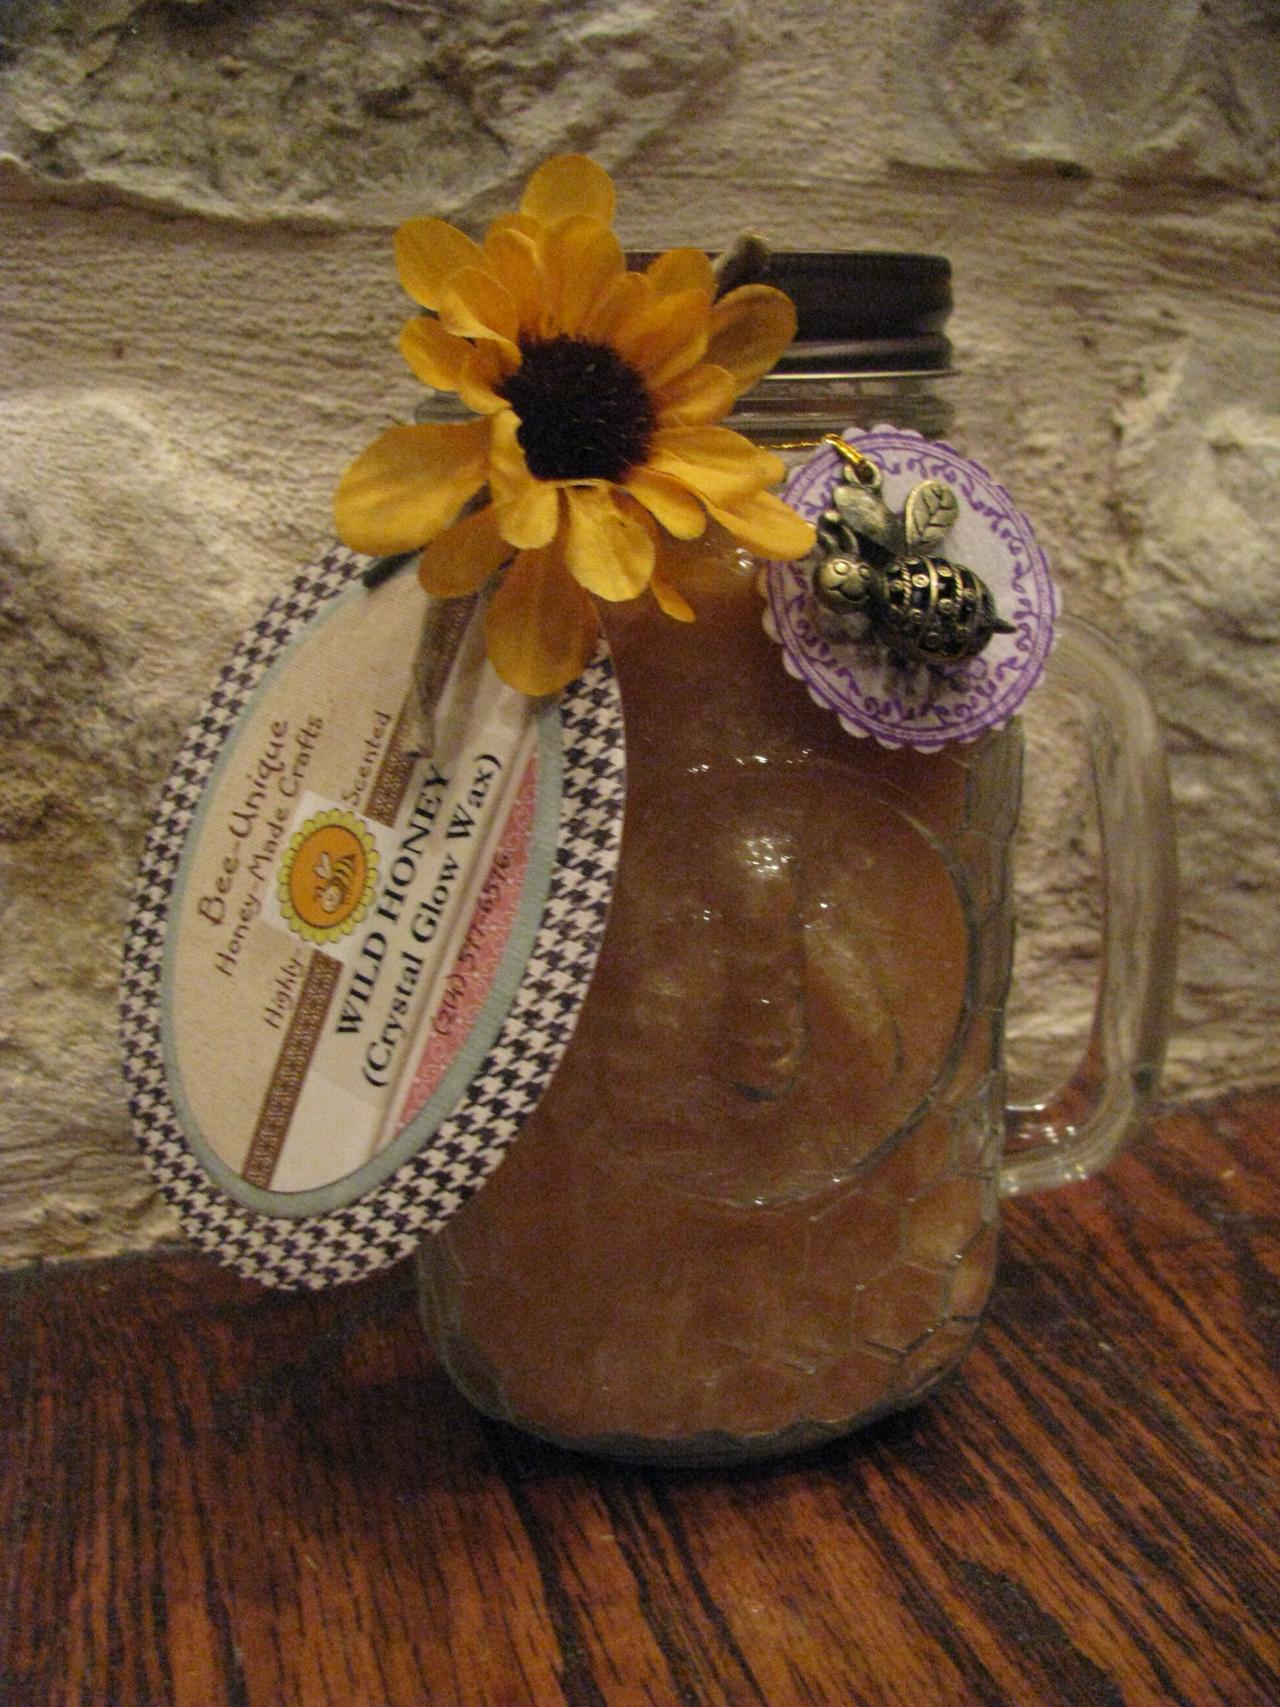 1 Each Handcrafted Highly Scented Candle 24 Oz Rare Limited Edition Honey Bee Mason Jug With Handle Rustic Lid Your Choice Of Wax And Honey